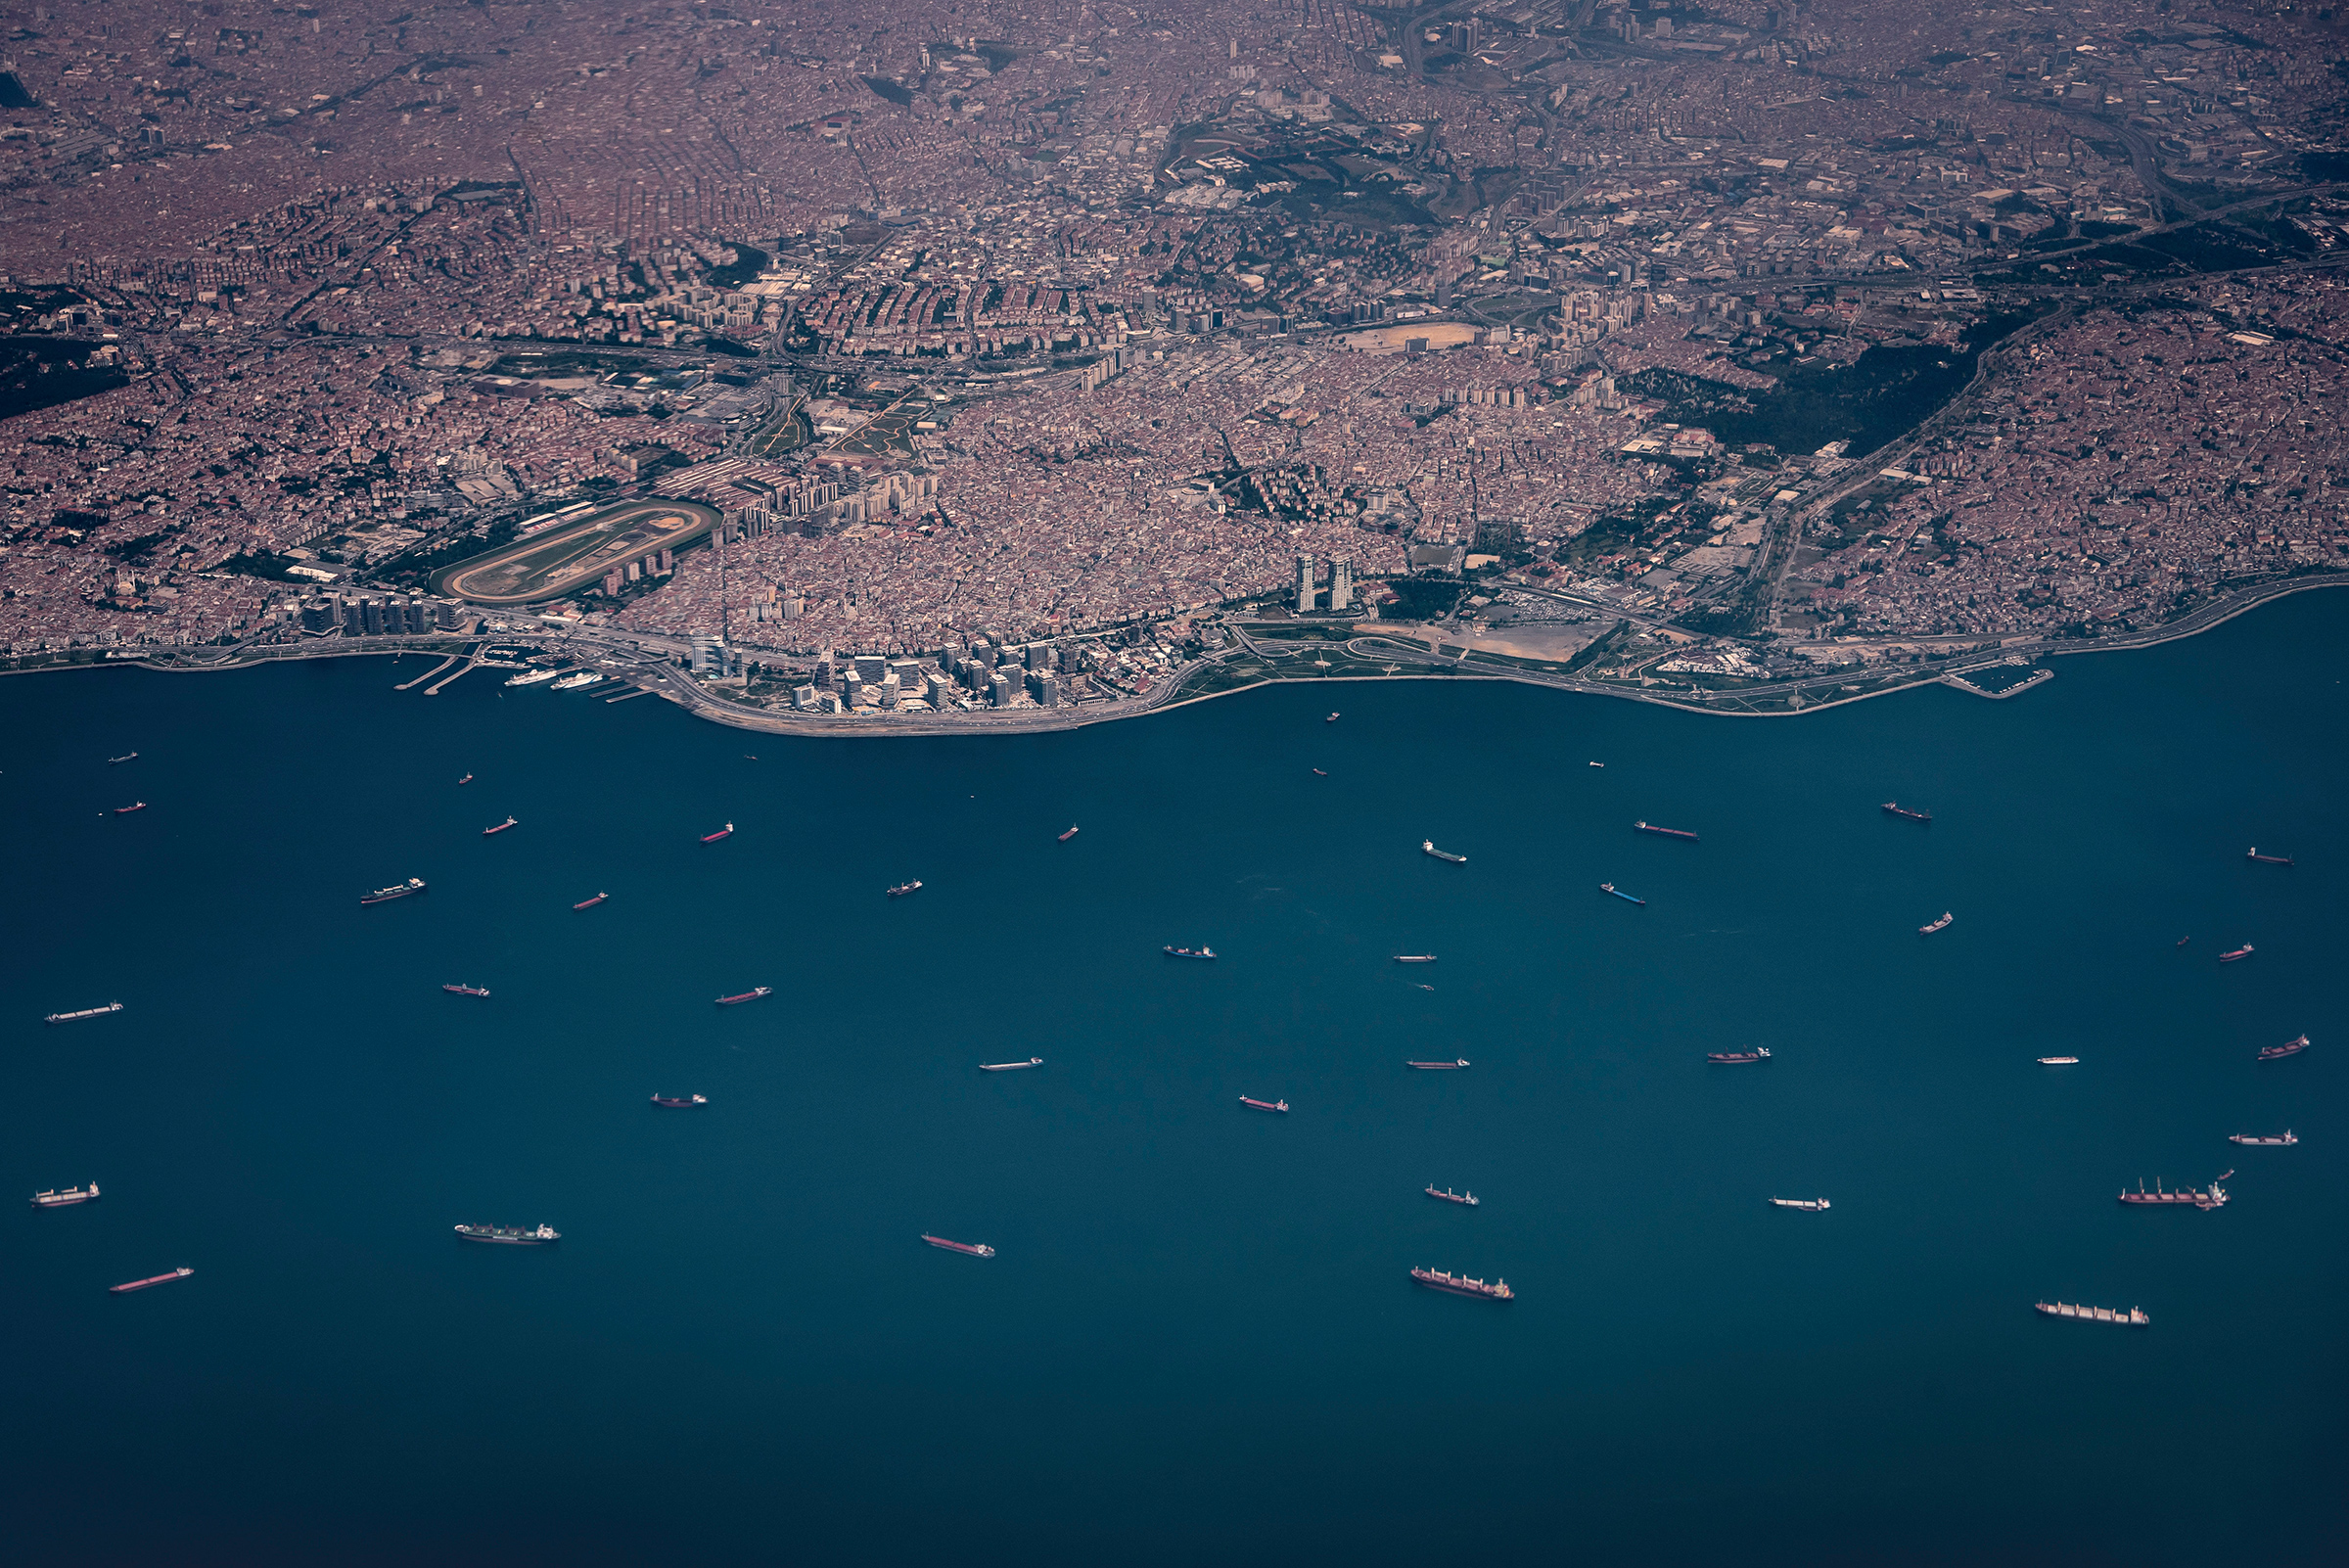 Cargo ships wait for their turn to enter the Bosporus Strait outside Istanbul in June 2018. (Sergey Ponomarev—The New York Times/Redux)